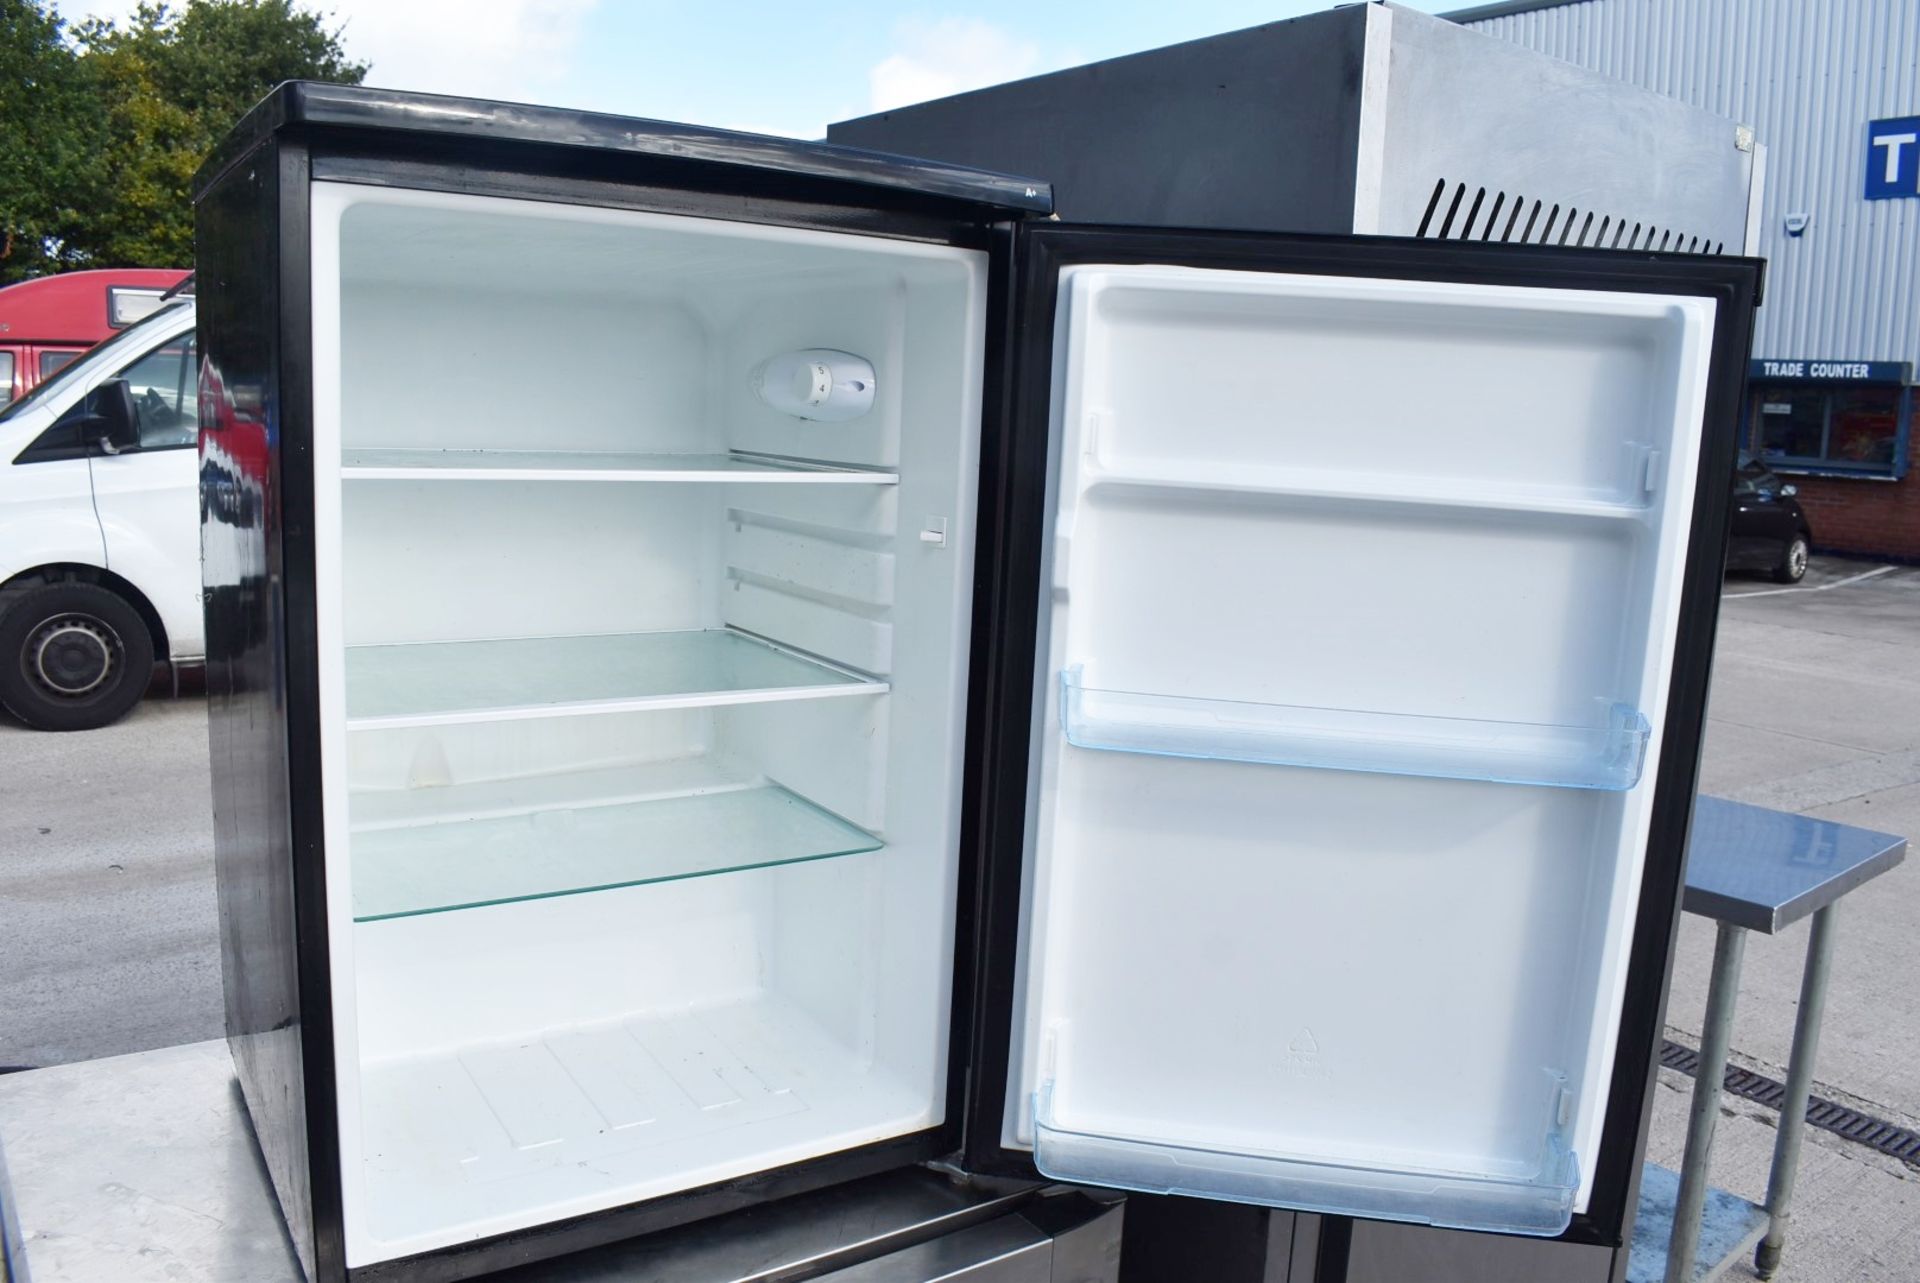 1 x LEC Undercounter Fridge in Black - Recently Removed From a Dark Kitchen Environment - Ref: DK112 - Image 2 of 3